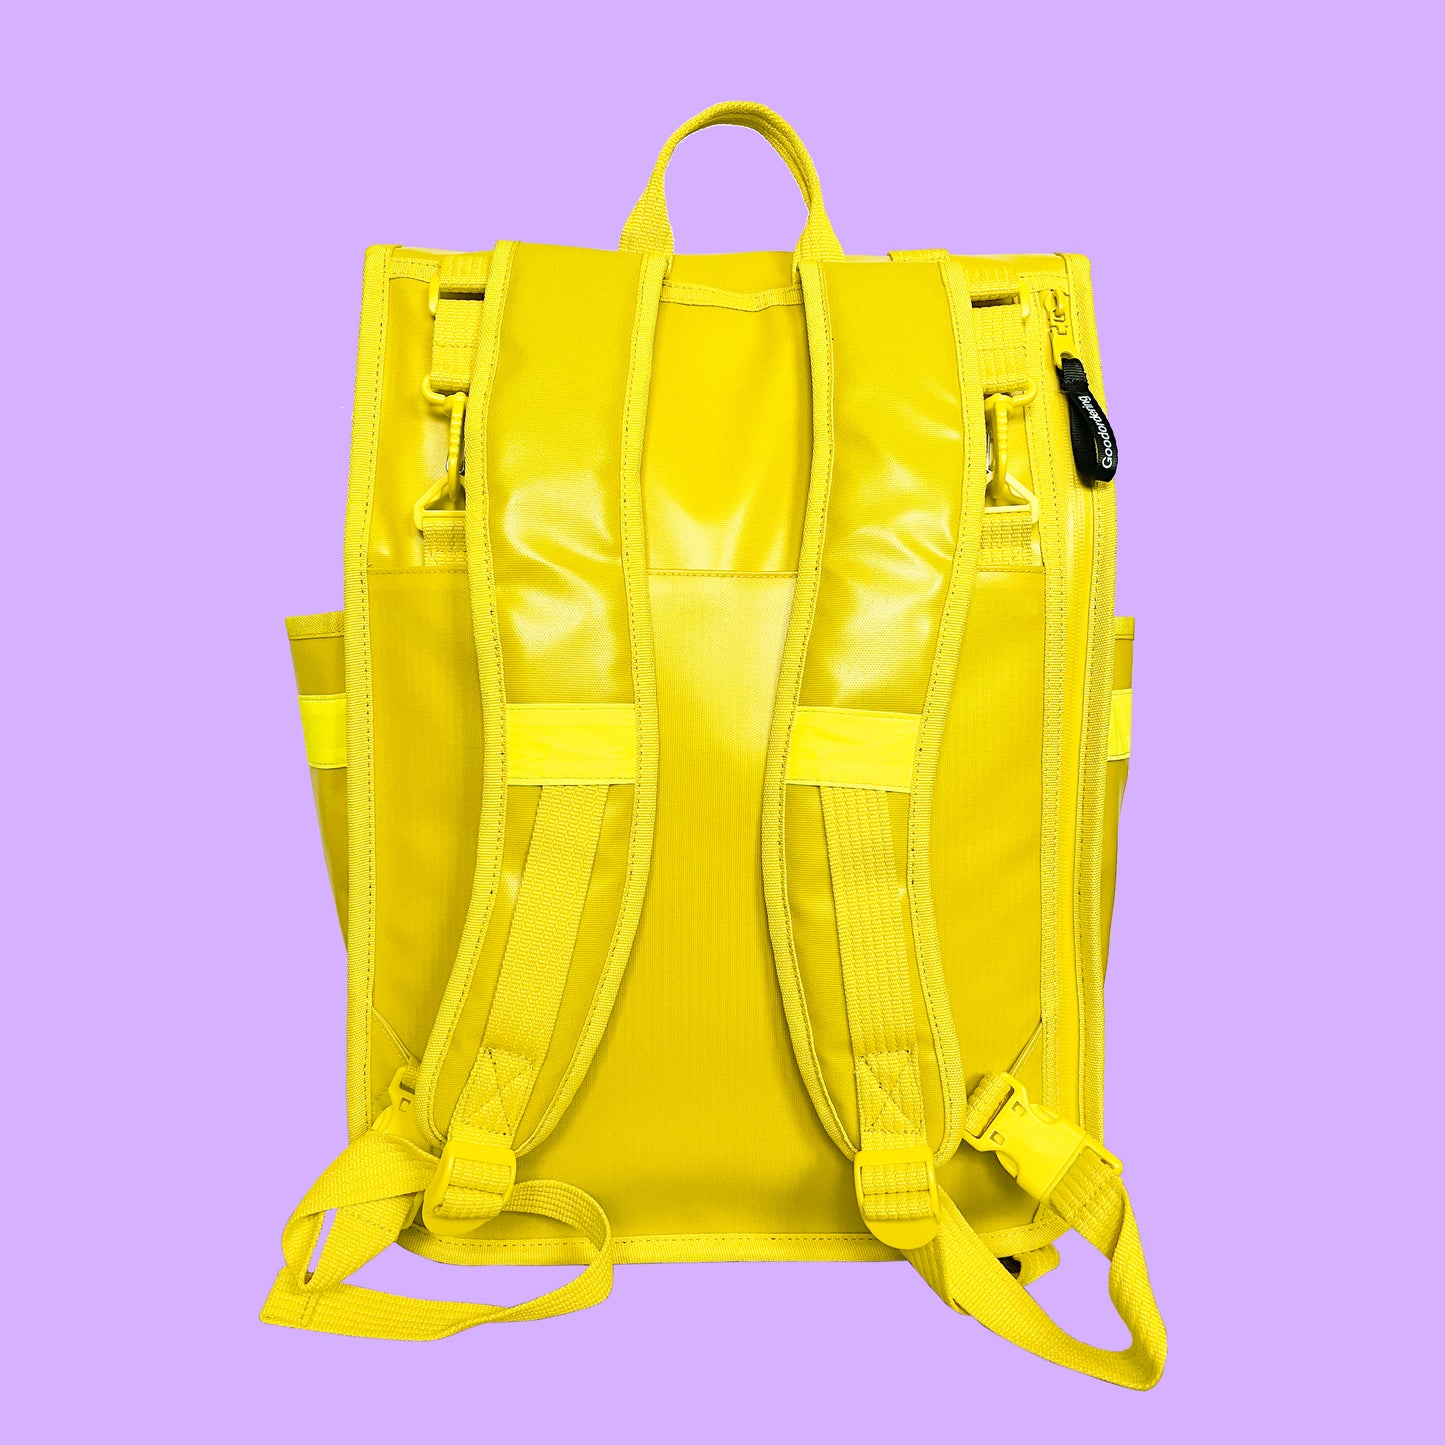 Monochrome Rolltop Backpack Pannier Yellow 2.0